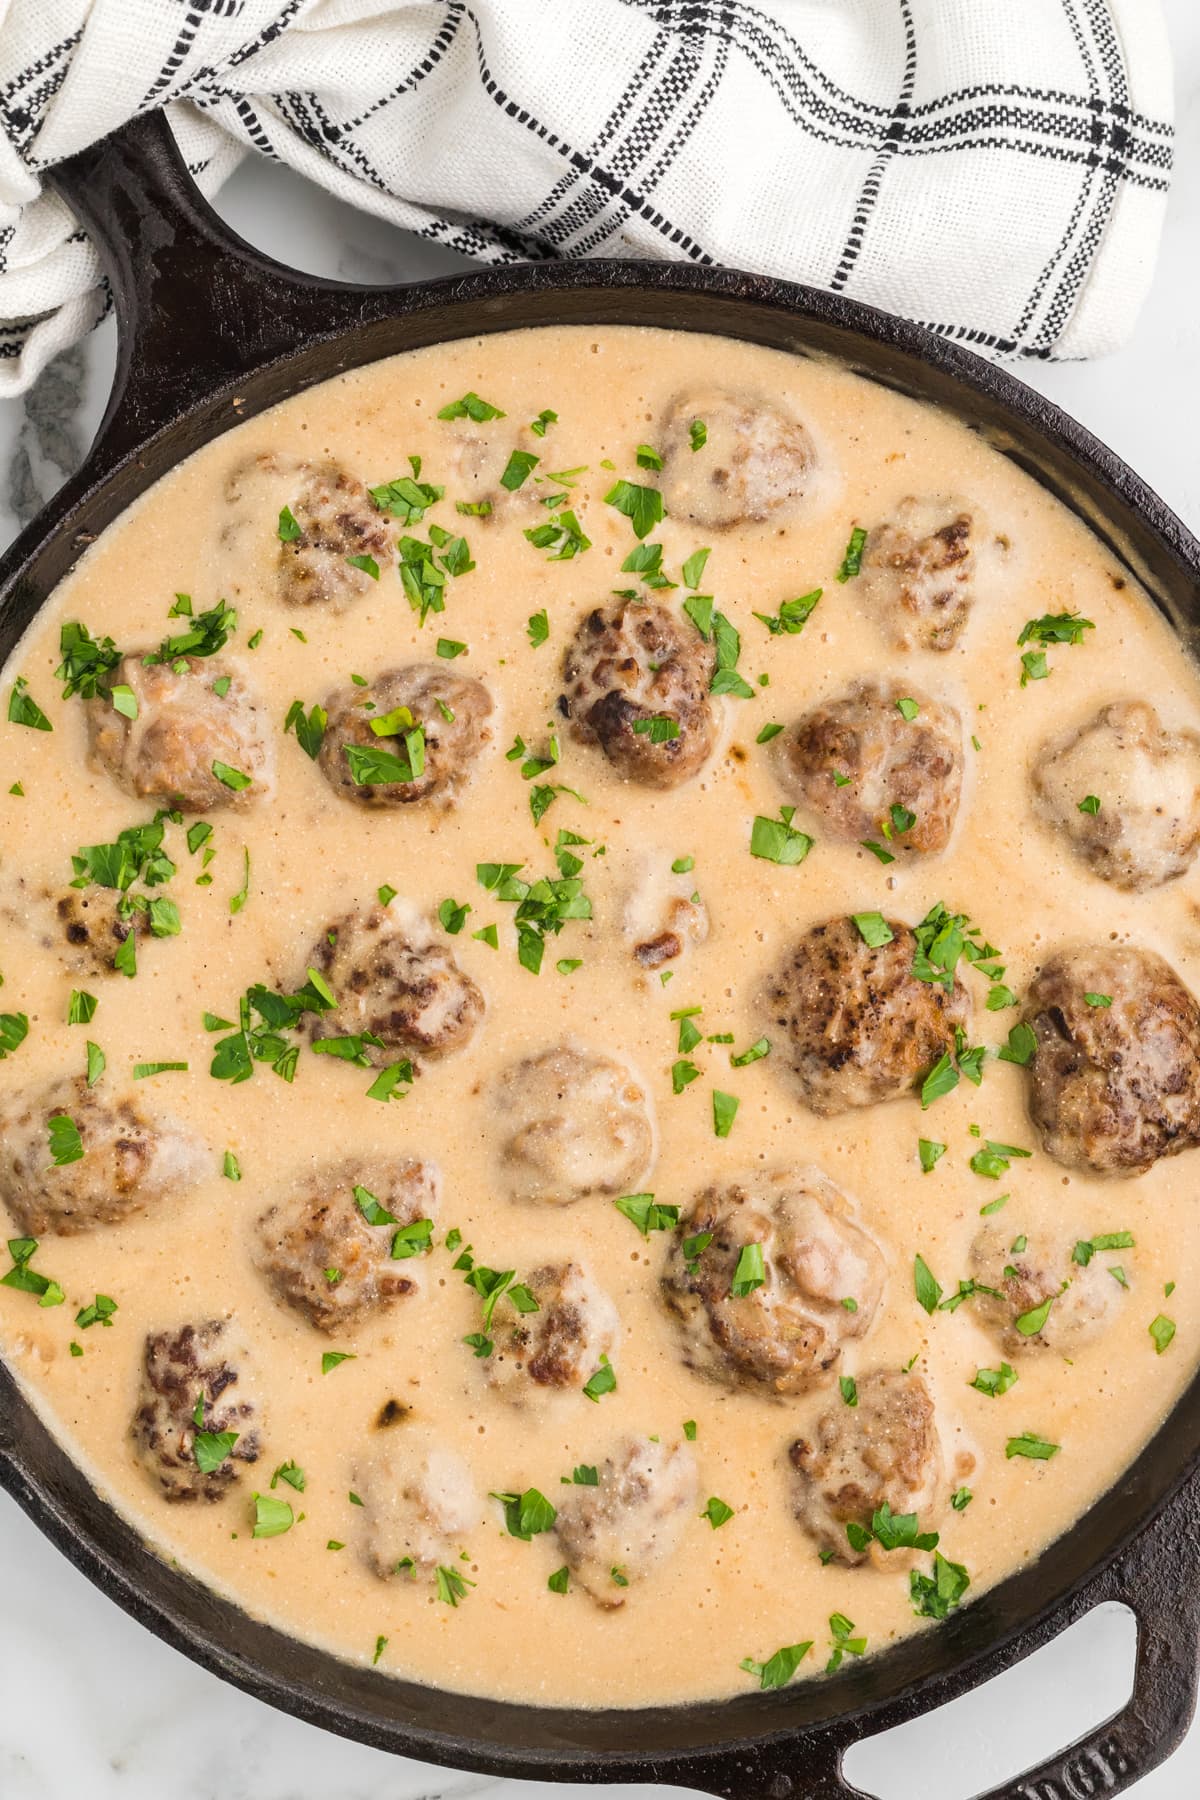 Ikea meatballs in a skillet topped with parsley